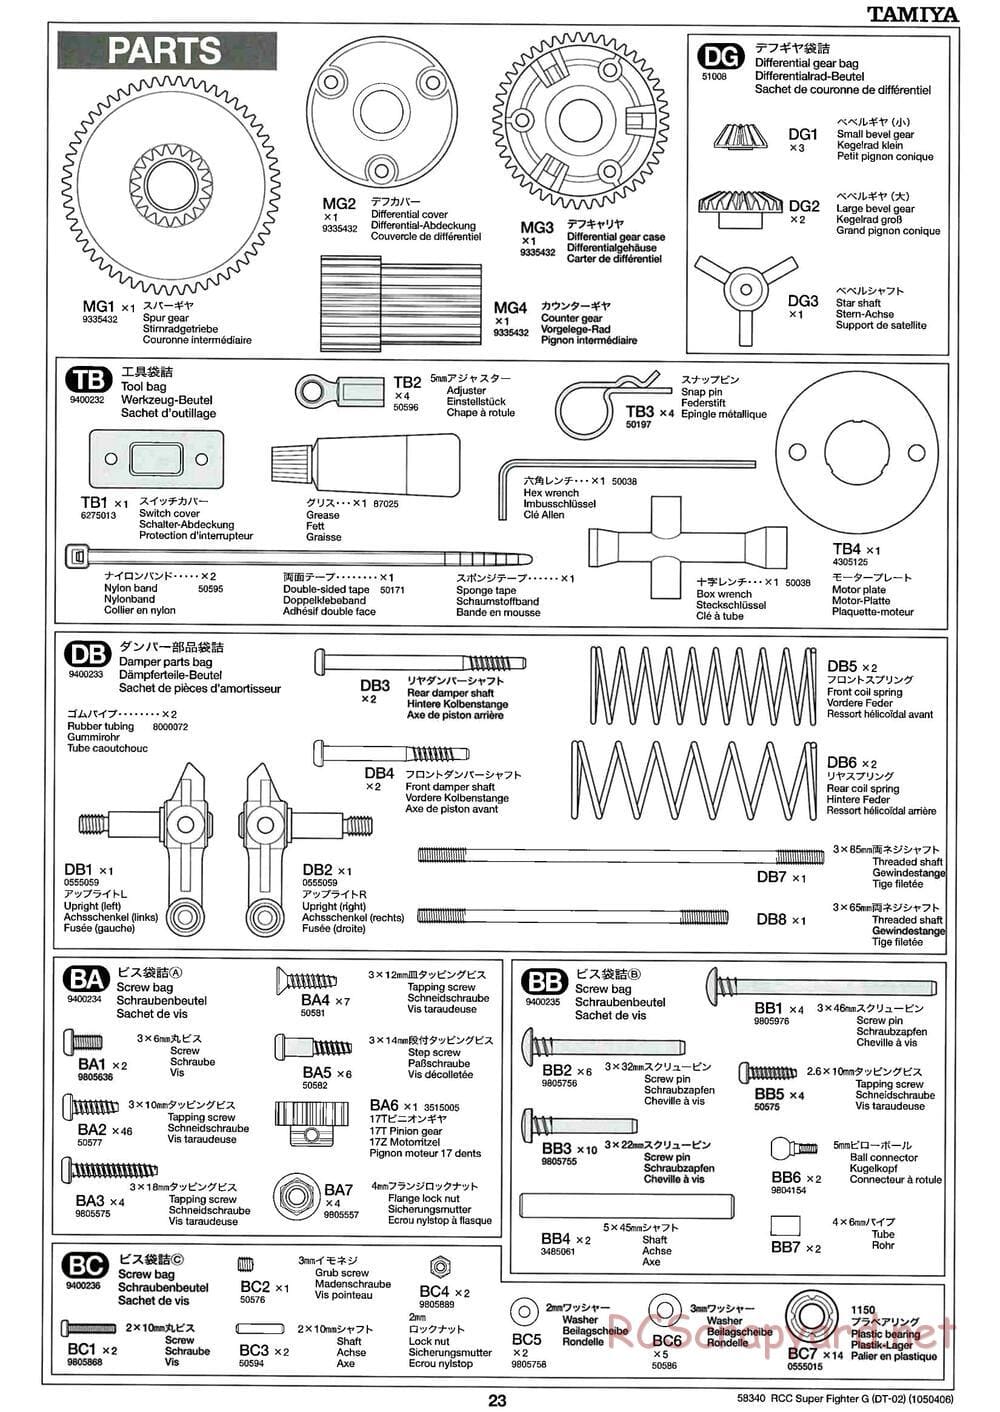 Tamiya - Super Fighter G Chassis - Manual - Page 23